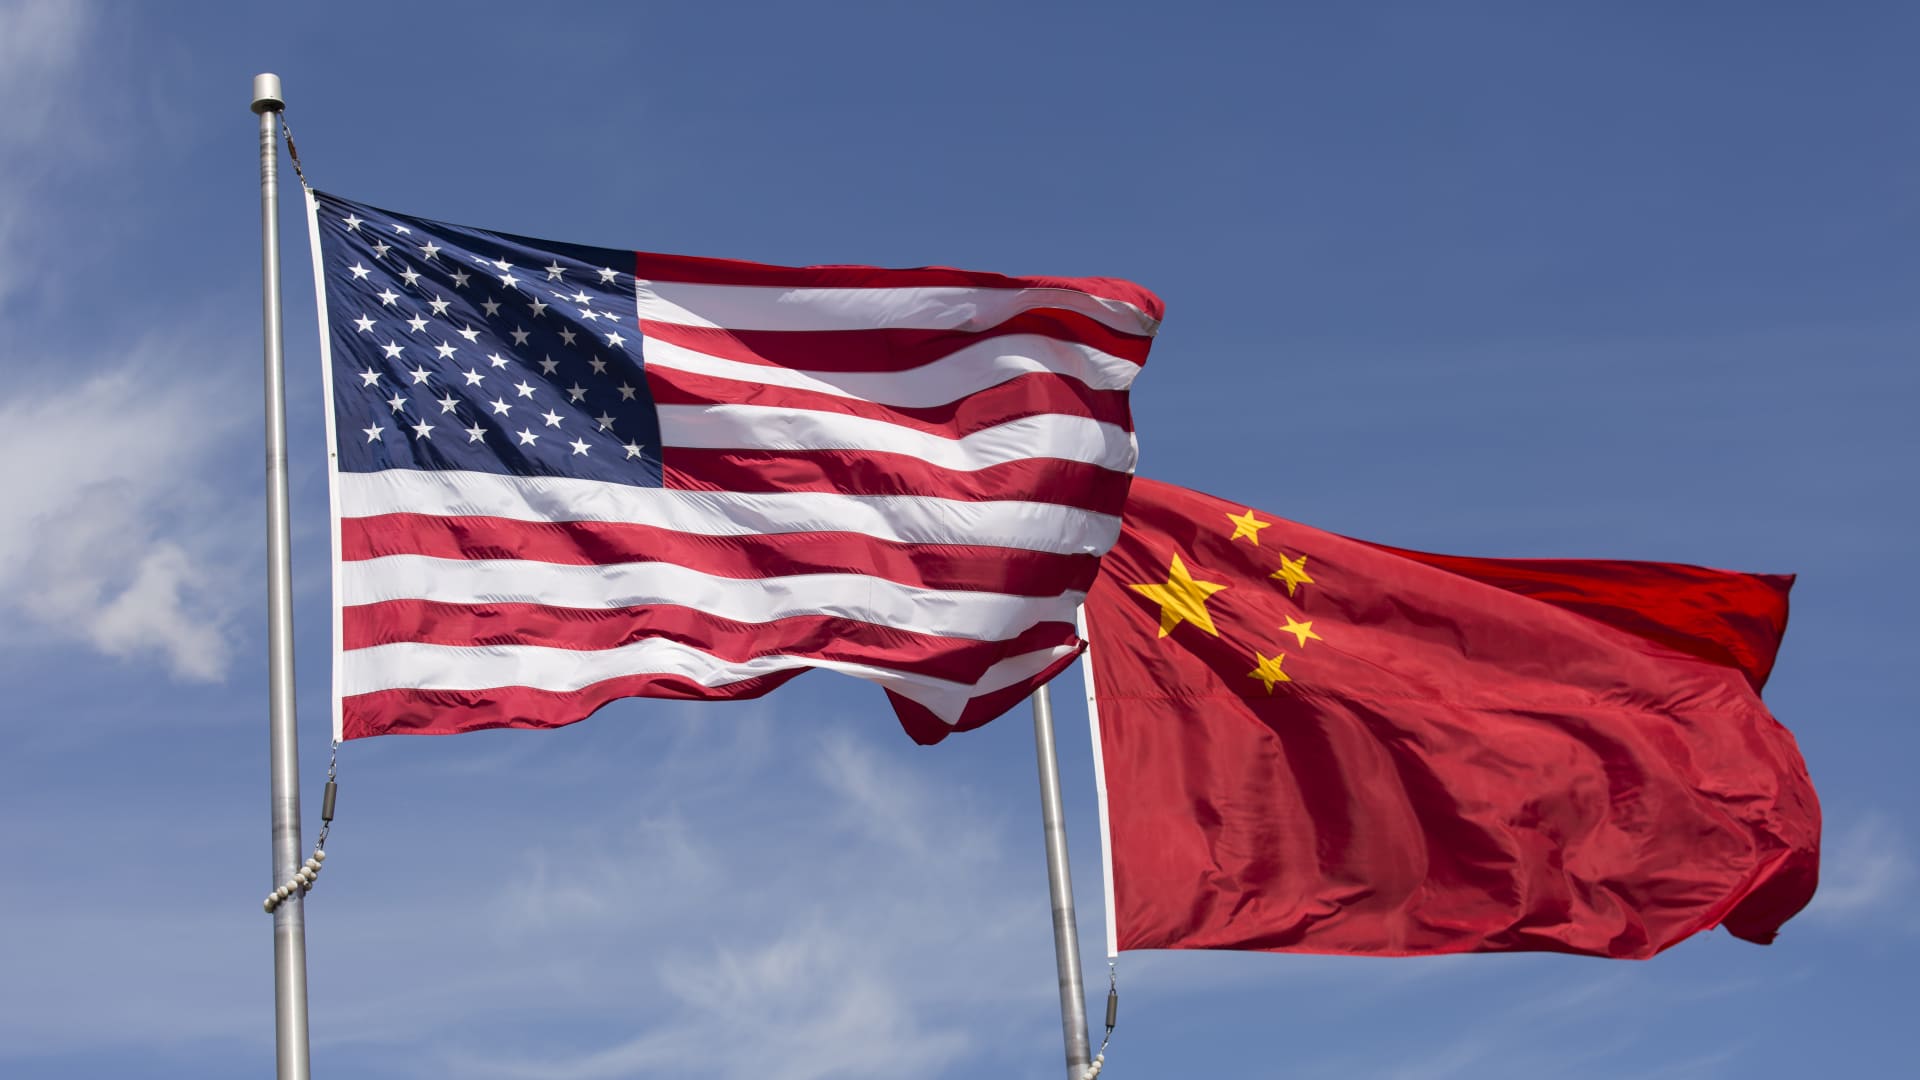 China is an enemy of the U.S. for a growing number of Americans: Pew poll [Video]